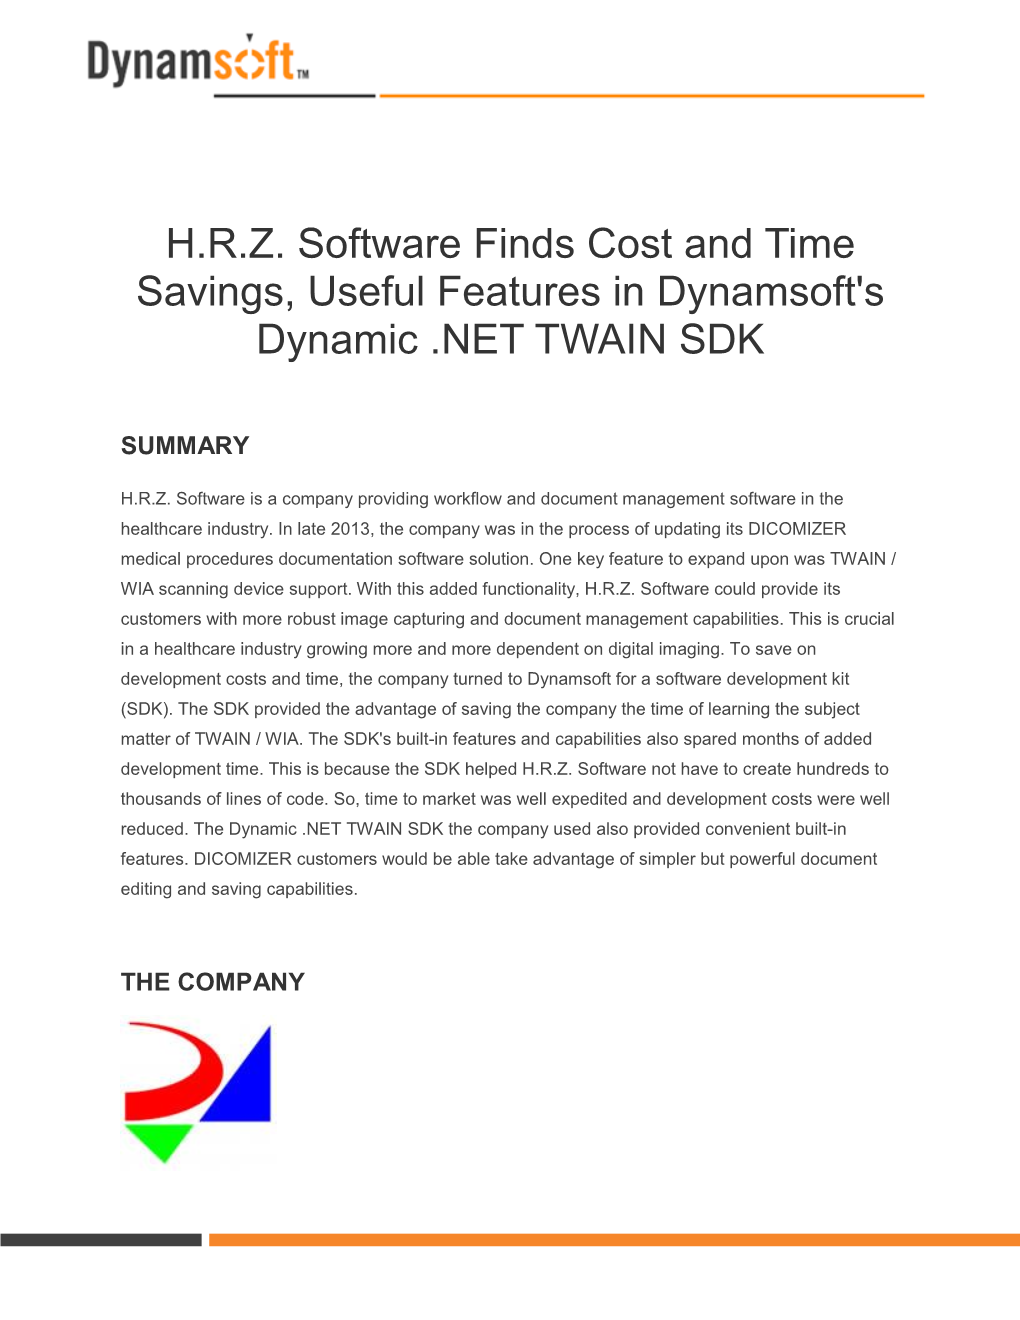 H.R.Z. Software Finds Cost and Time Savings, Useful Features in Dynamsoft's Dynamic .NET TWAIN SDK